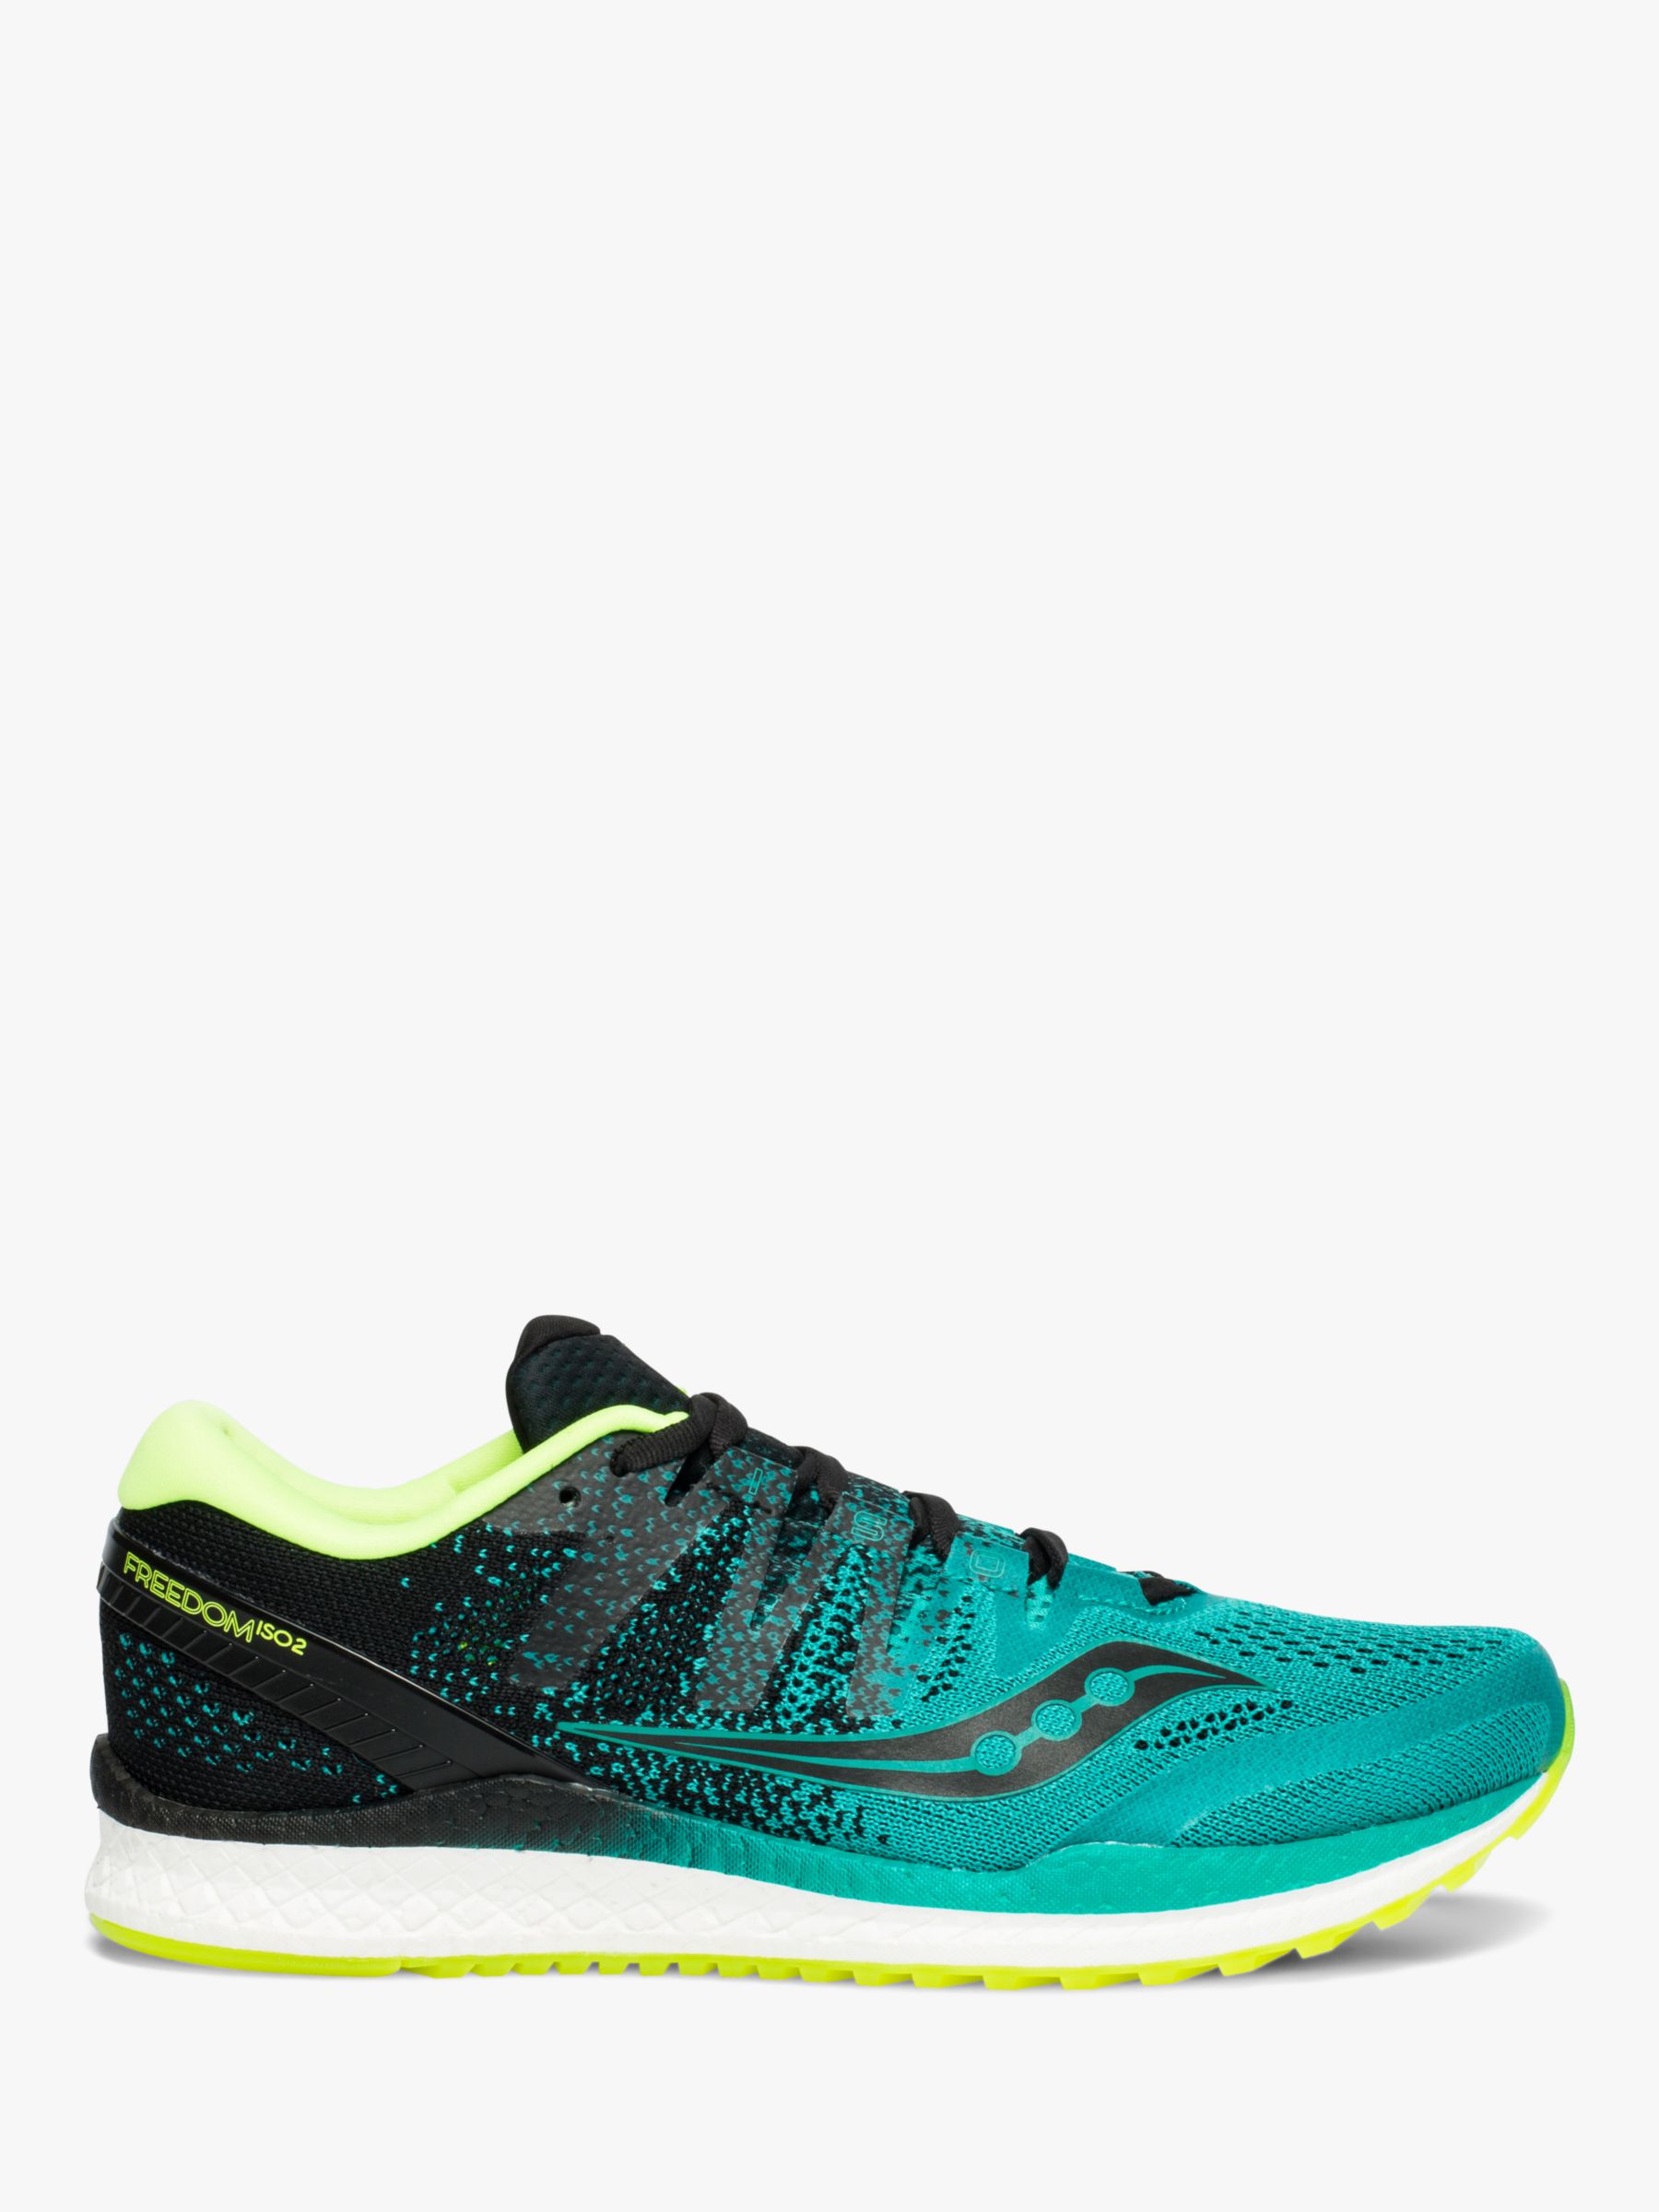 cheapest saucony freedom iso